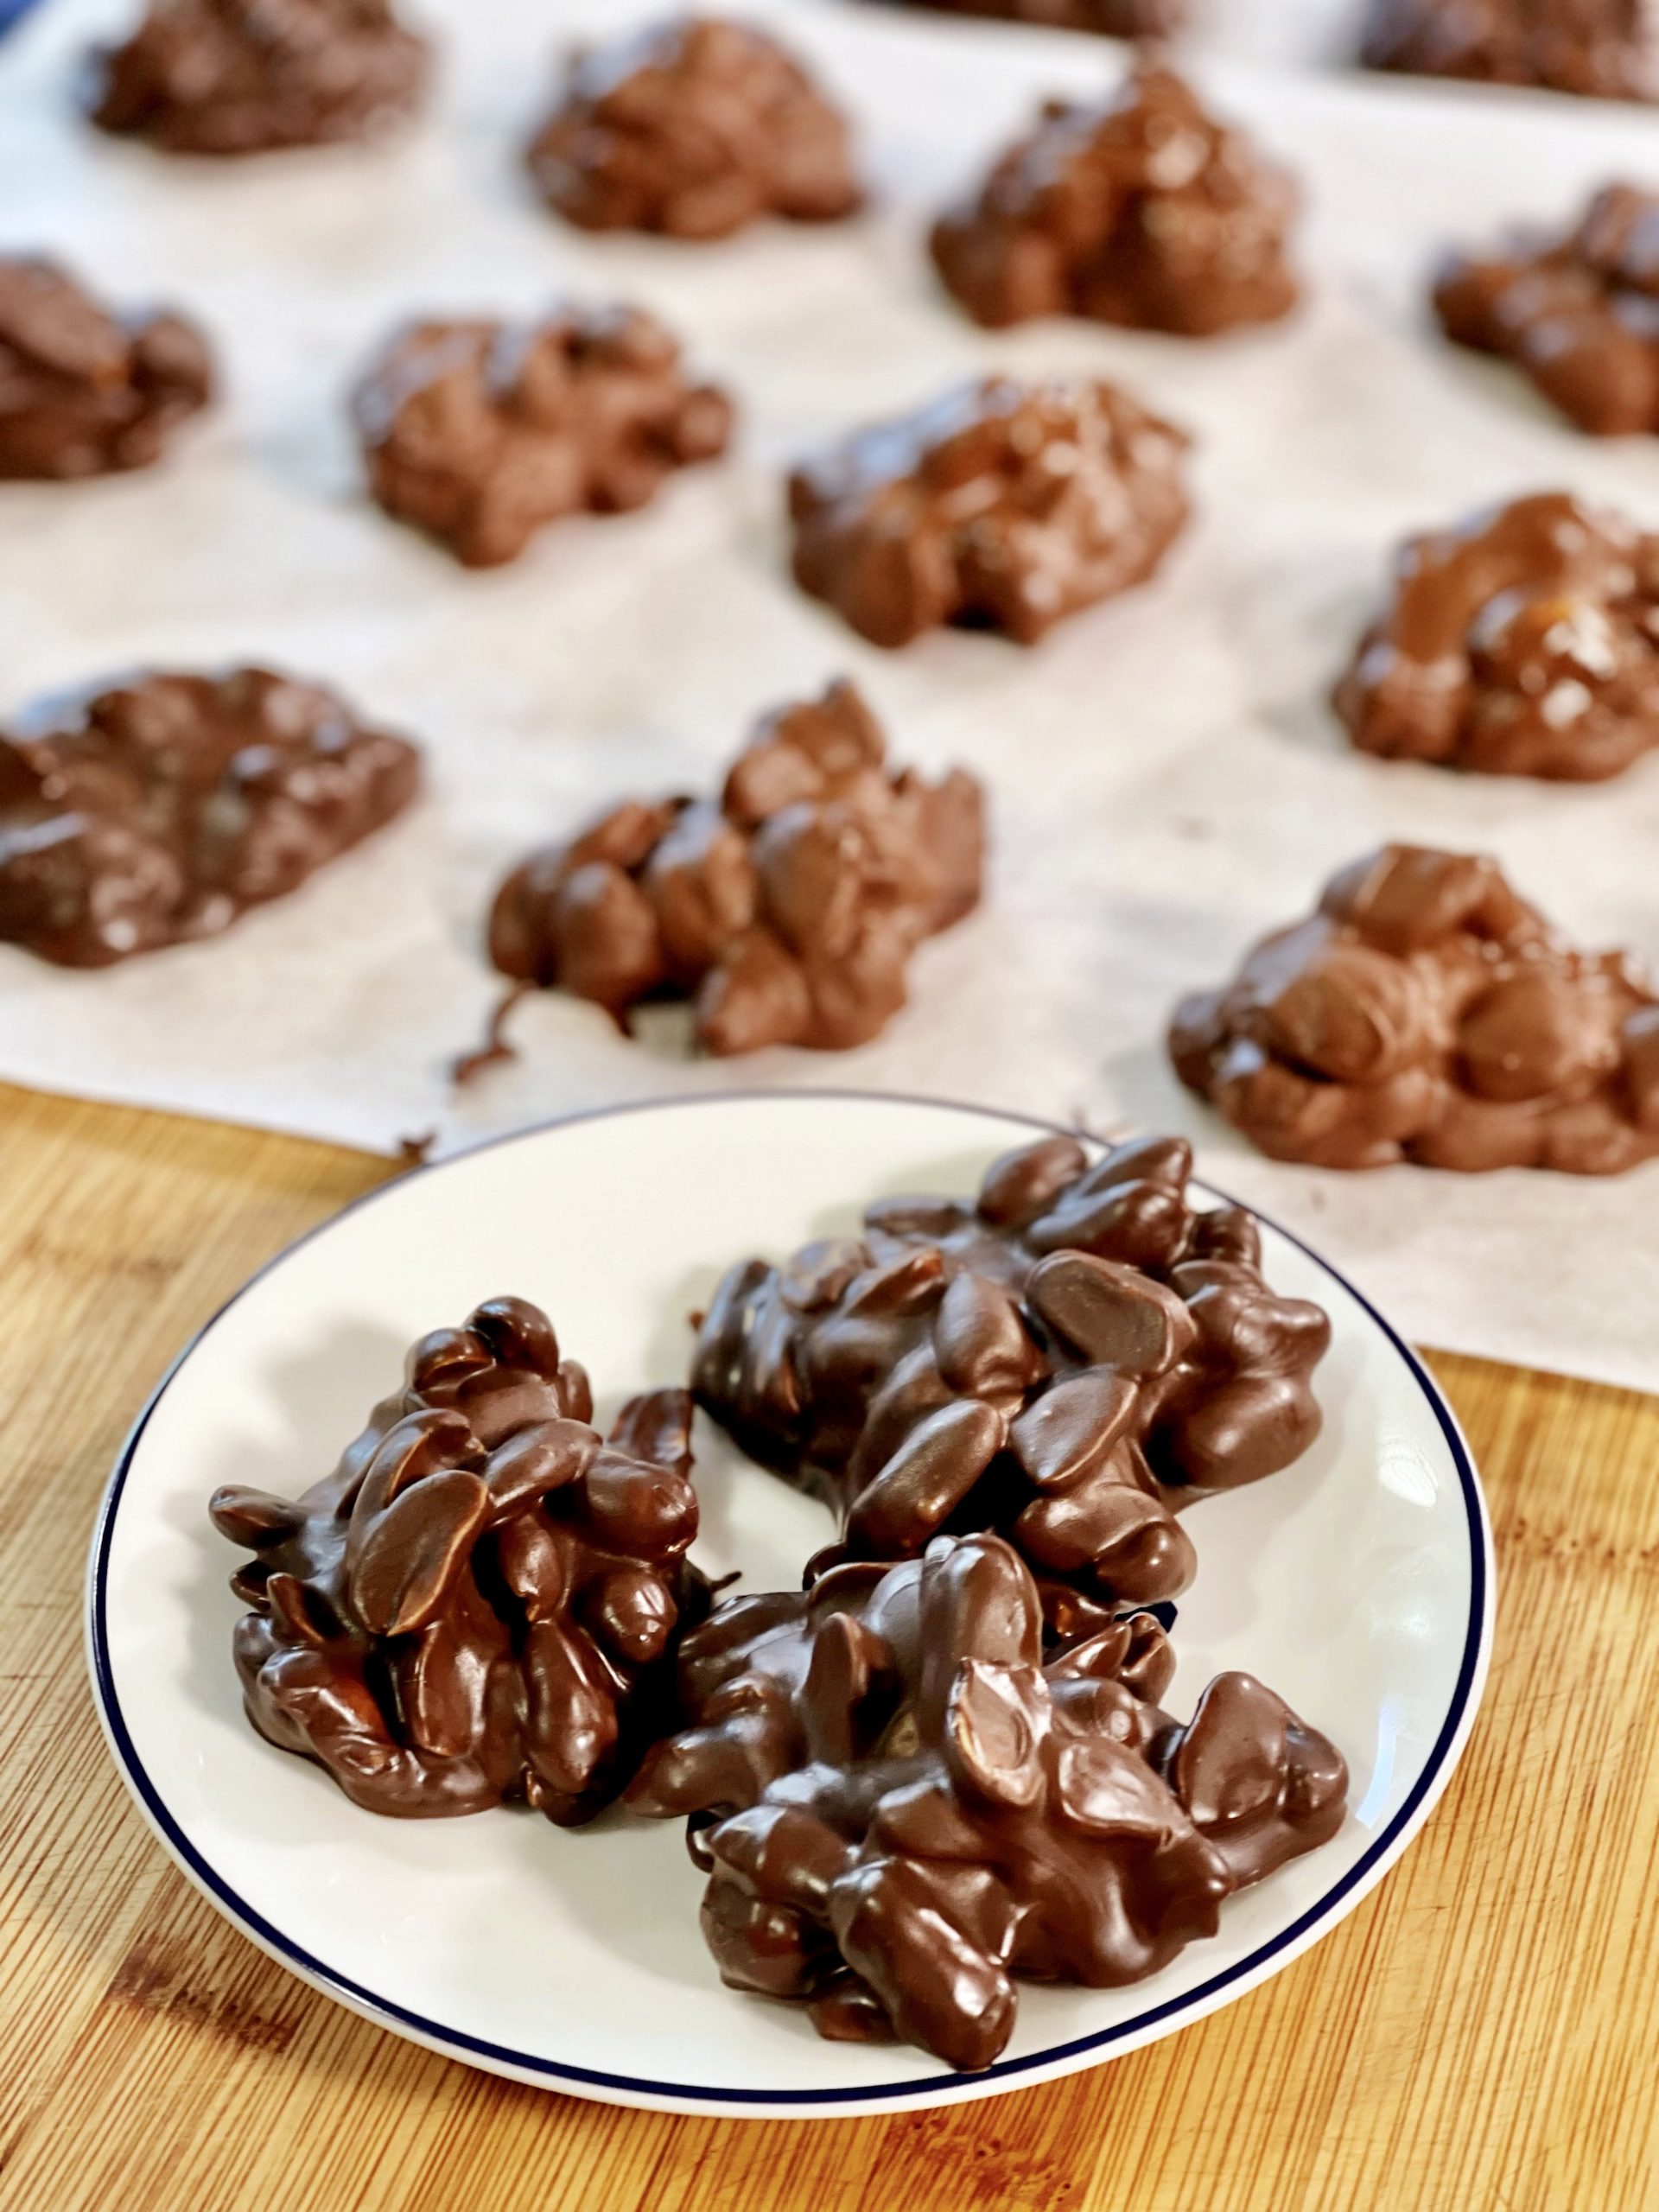 Peanut Clusters - cooking with chef bryan